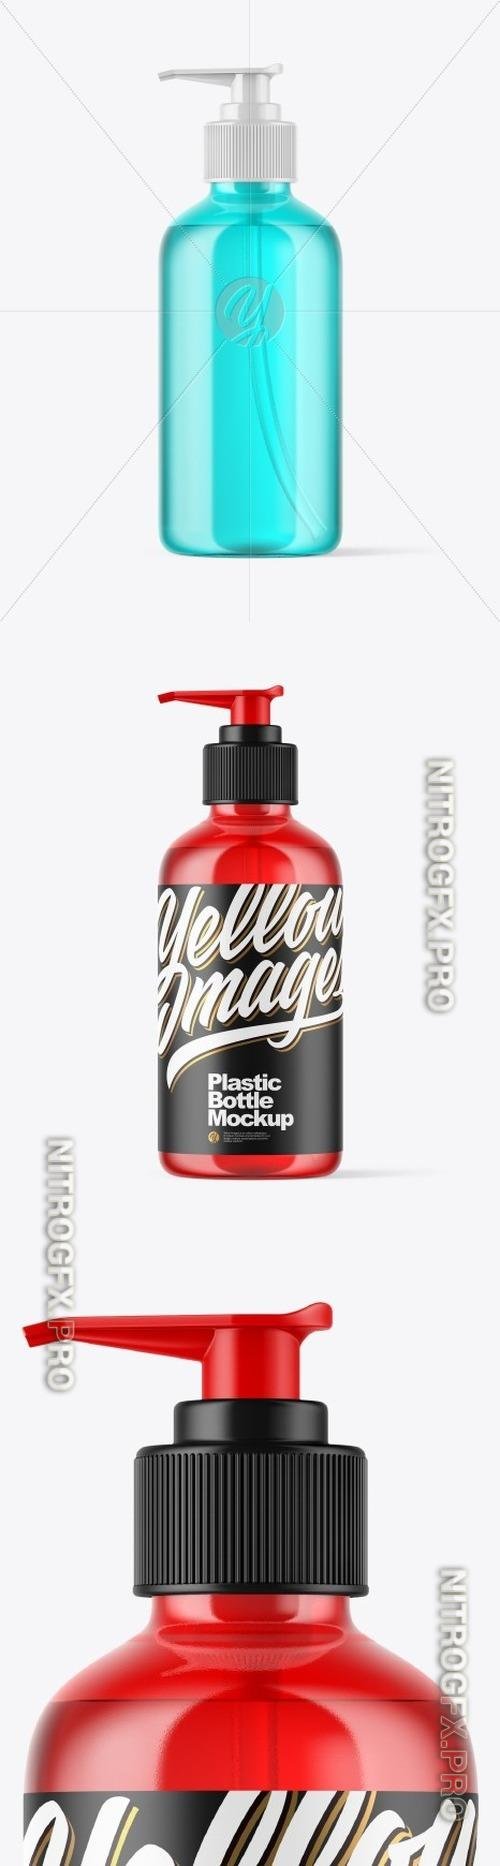 Plastic Cosmetic Bottle with Pump Mockup 49988